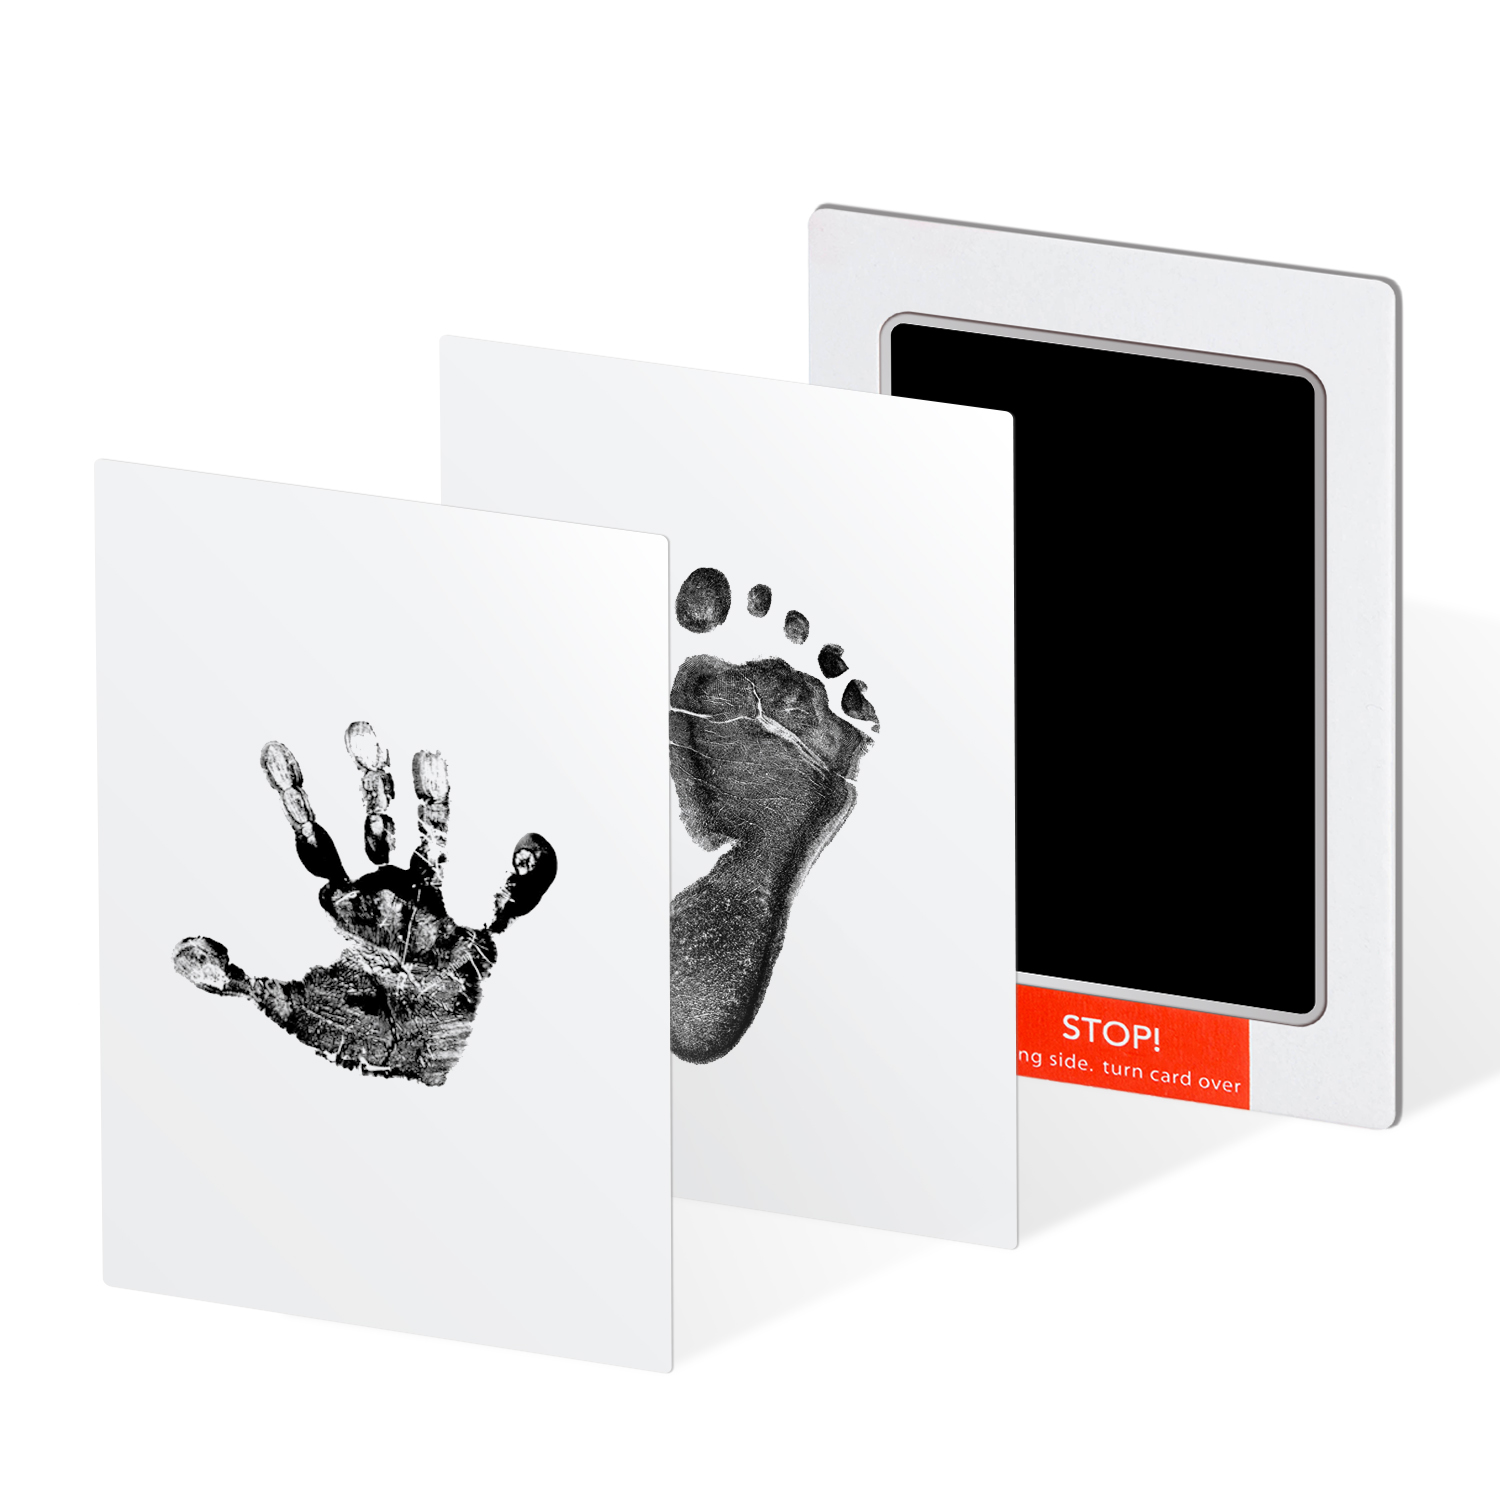 Baby Ink Hand and Footprint Kit Handprint Picture Frame for Newborns (Safe Clean-Touch Ink Pad for Prints) Best New Mom and Shower Gift Foot IMPRES